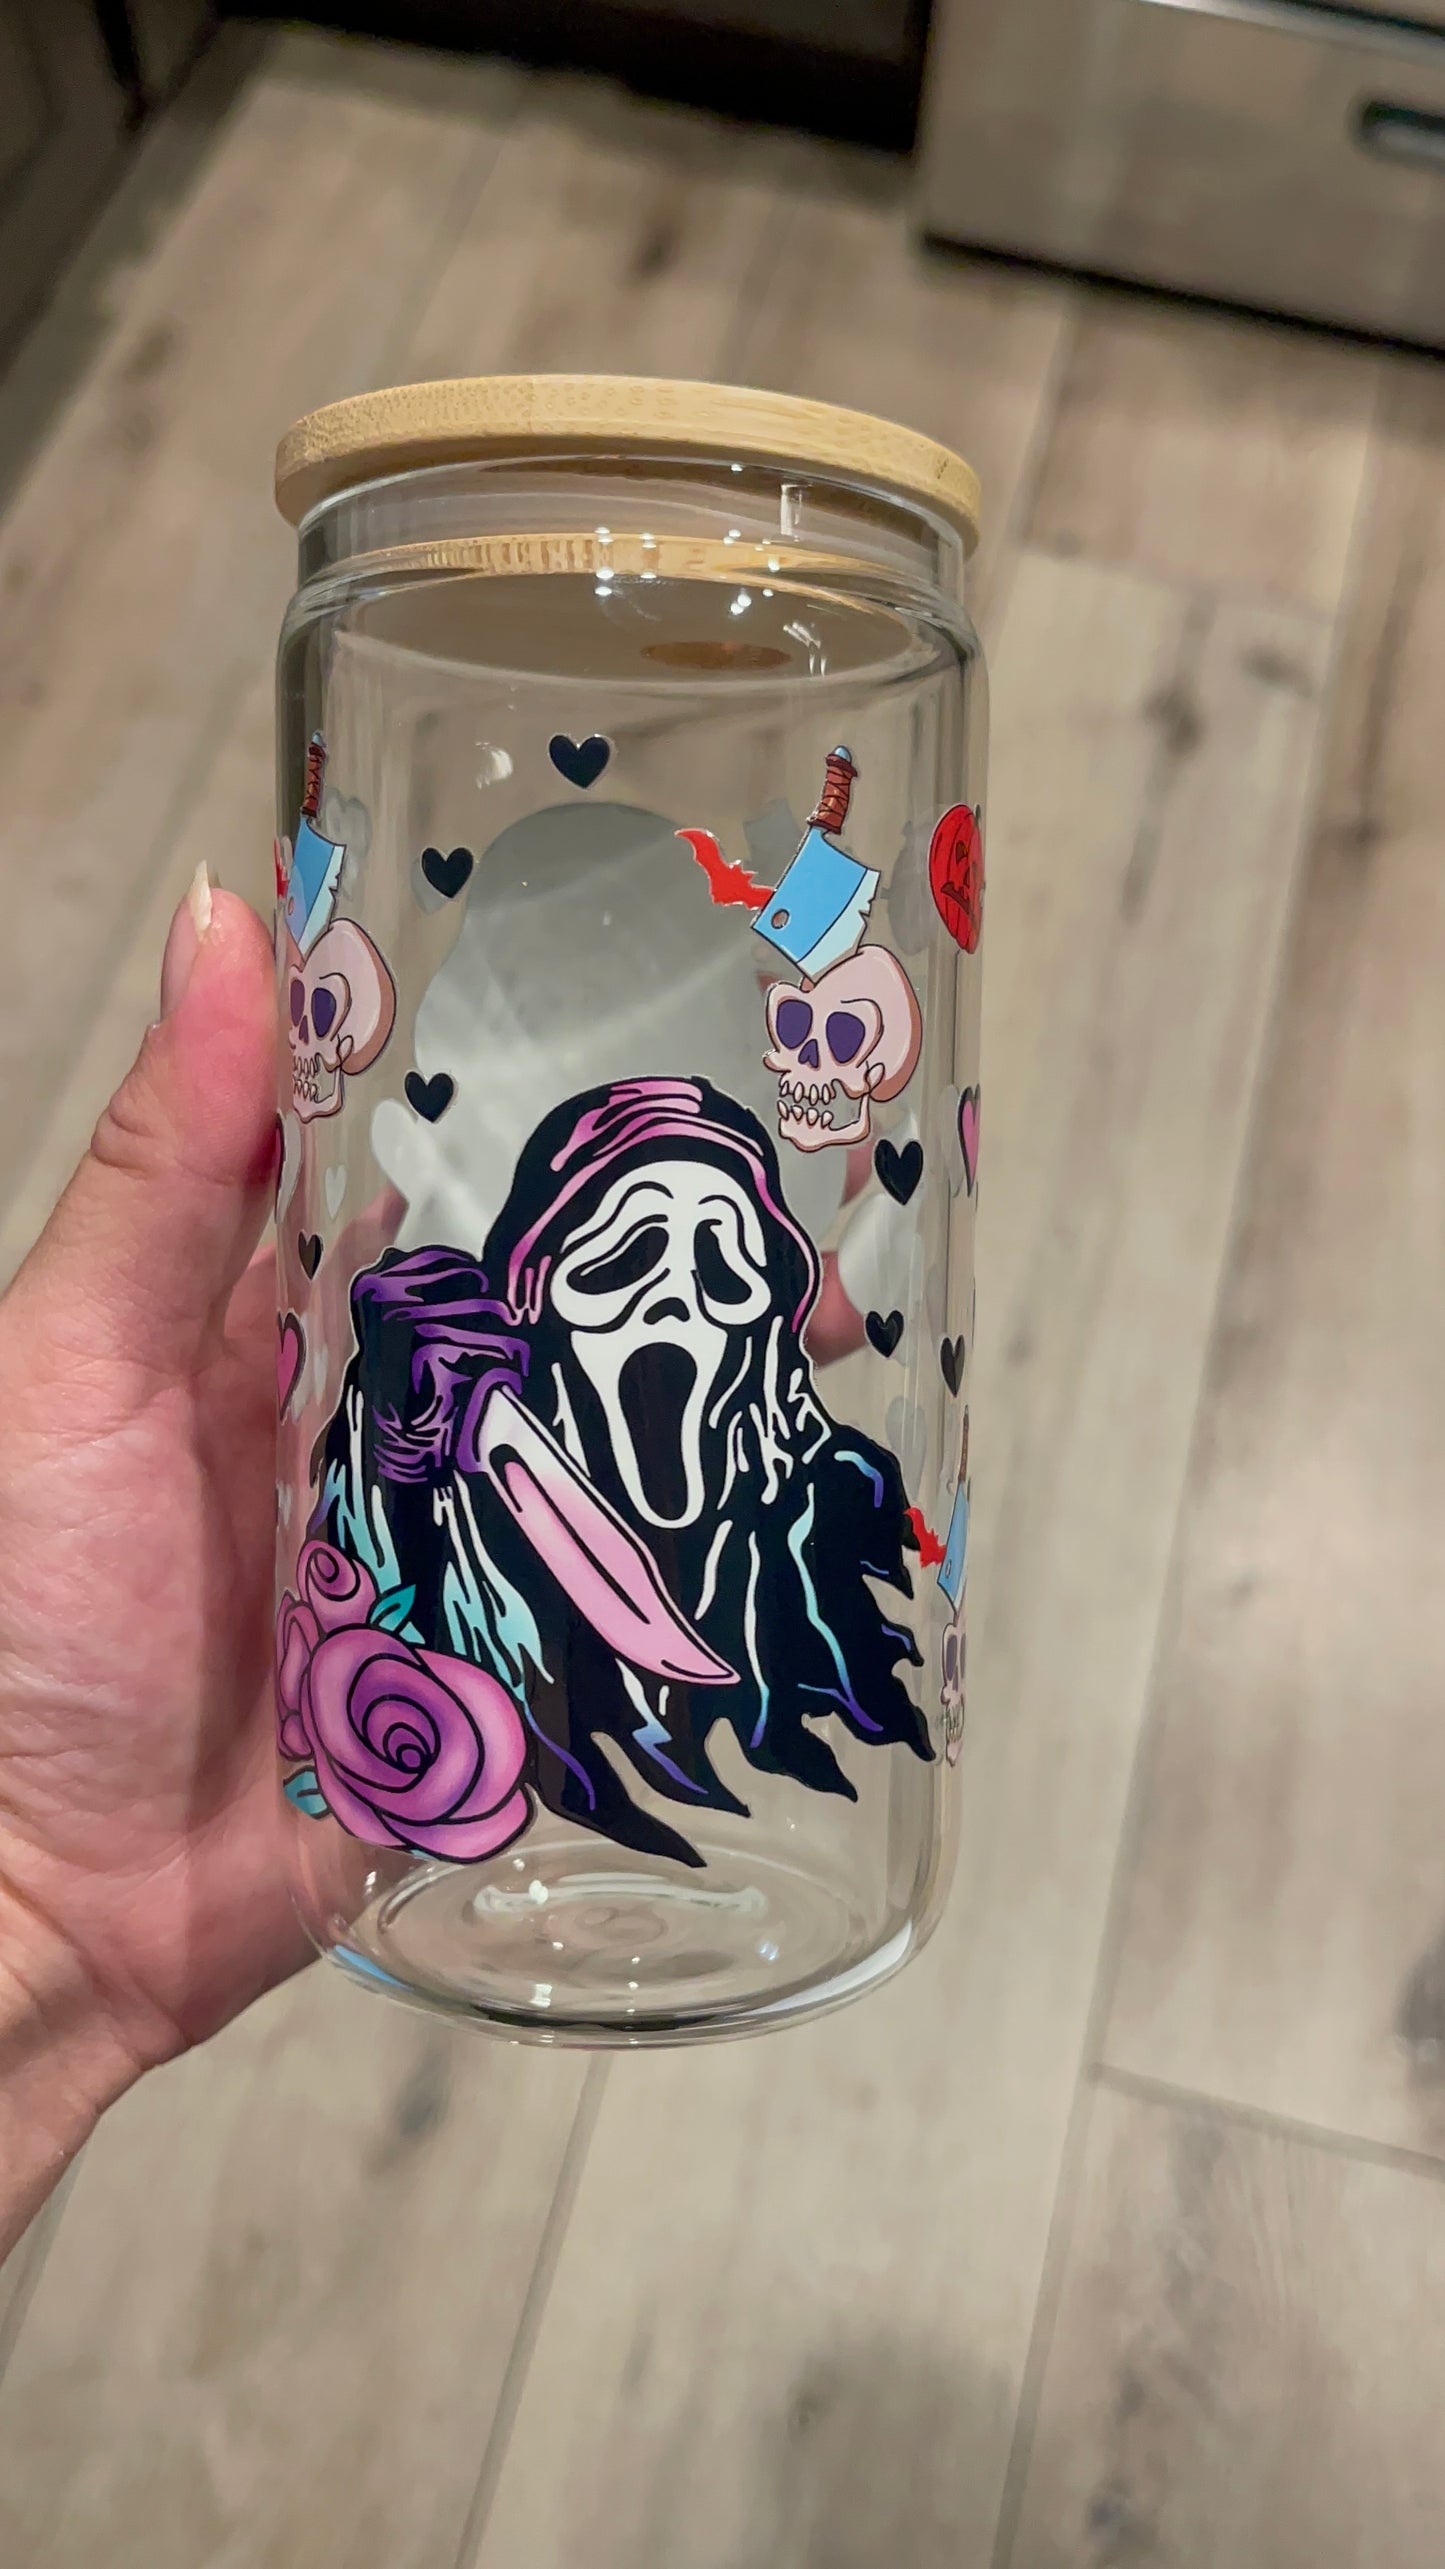 Scary glass cup